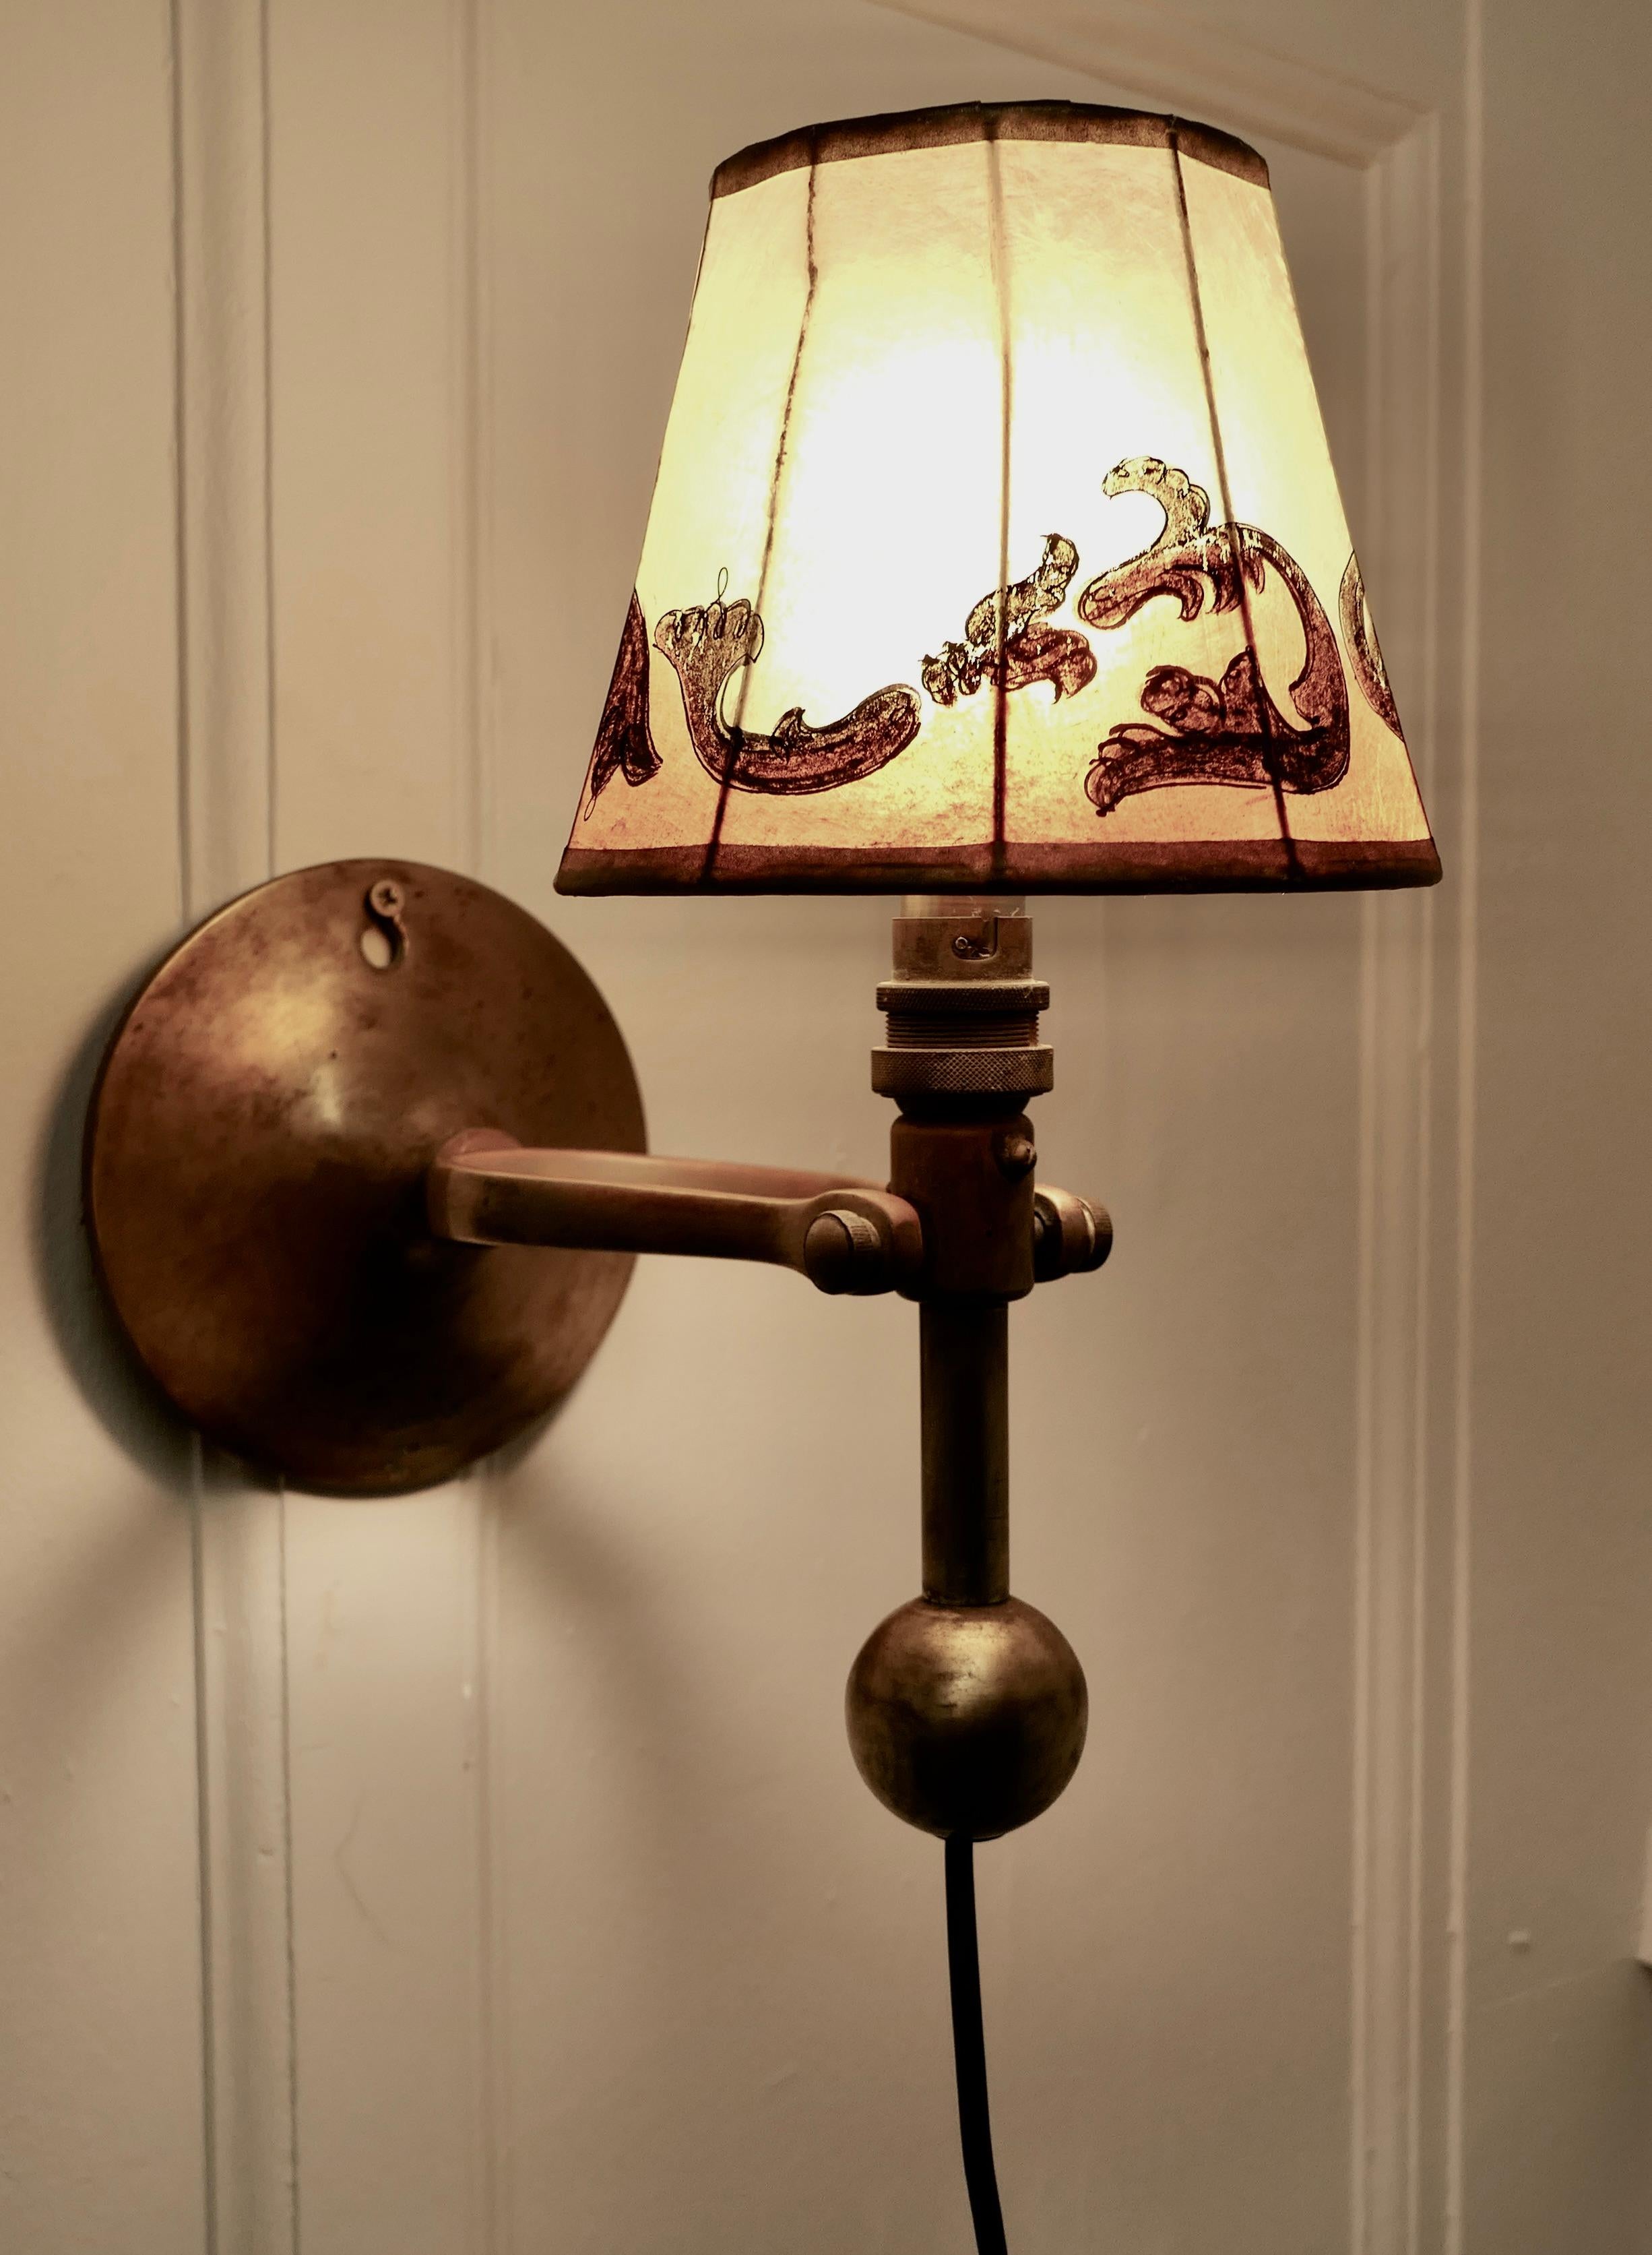 Brass Gimbal Ships Lamp, Wall Hung or Table Lamp

This is a very attractive piece, the lamp originated from a boat, it has a gimbal action which when the boat sways from time to time the it will remain upright.
This heavy lamp works well as a